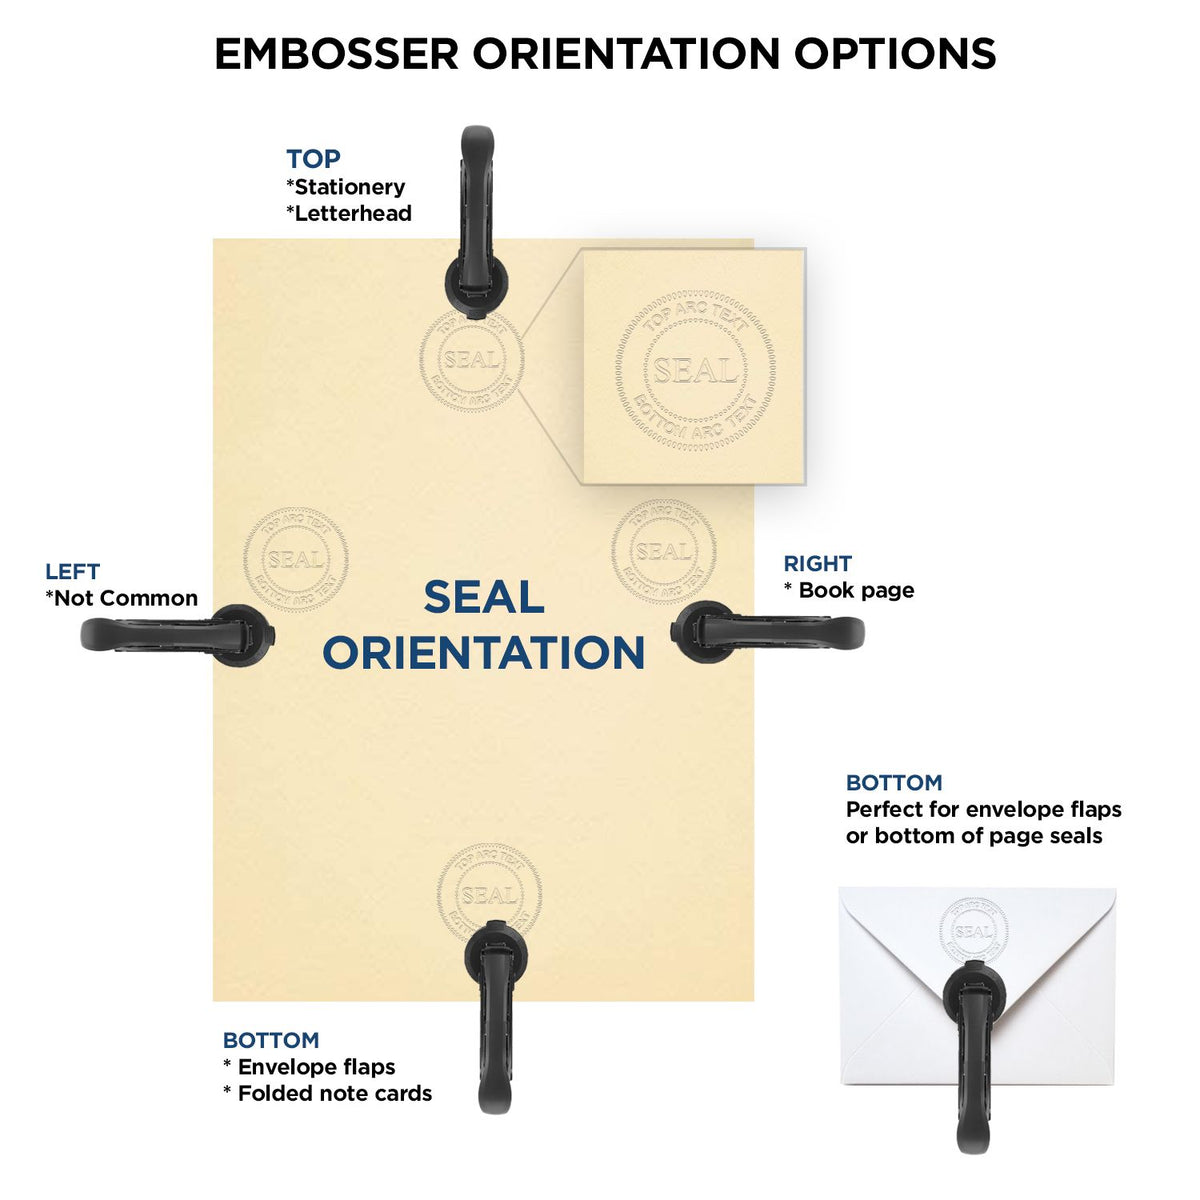 An infographic for the Heavy Duty Cast Iron Alabama Engineer Seal Embosser showing embosser orientation, this is showing examples of a top, bottom, right and left insert.